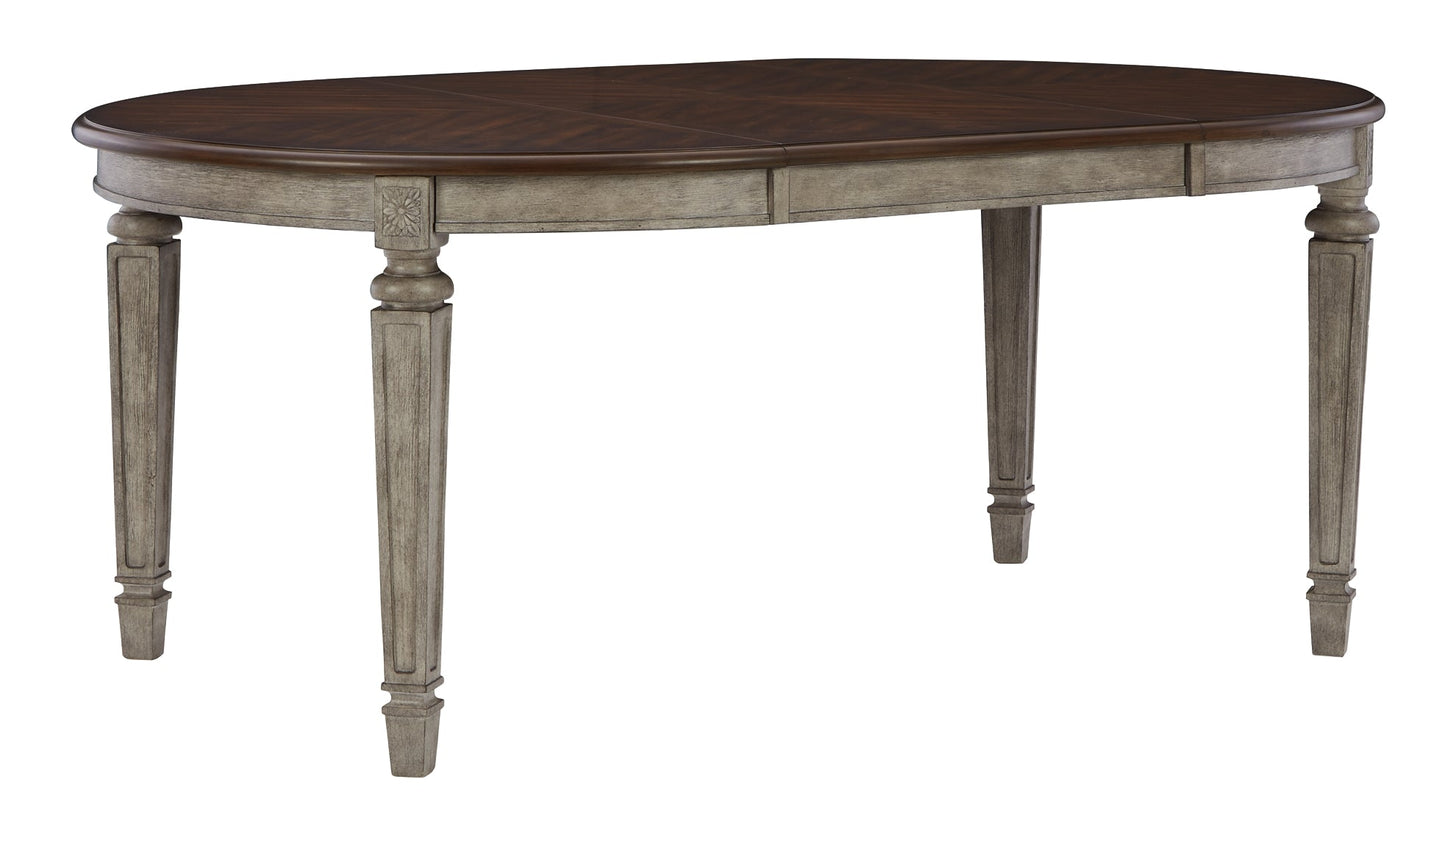 Lodenbay Dining Table and 6 Chairs at Towne & Country Furniture (AL) furniture, home furniture, home decor, sofa, bedding